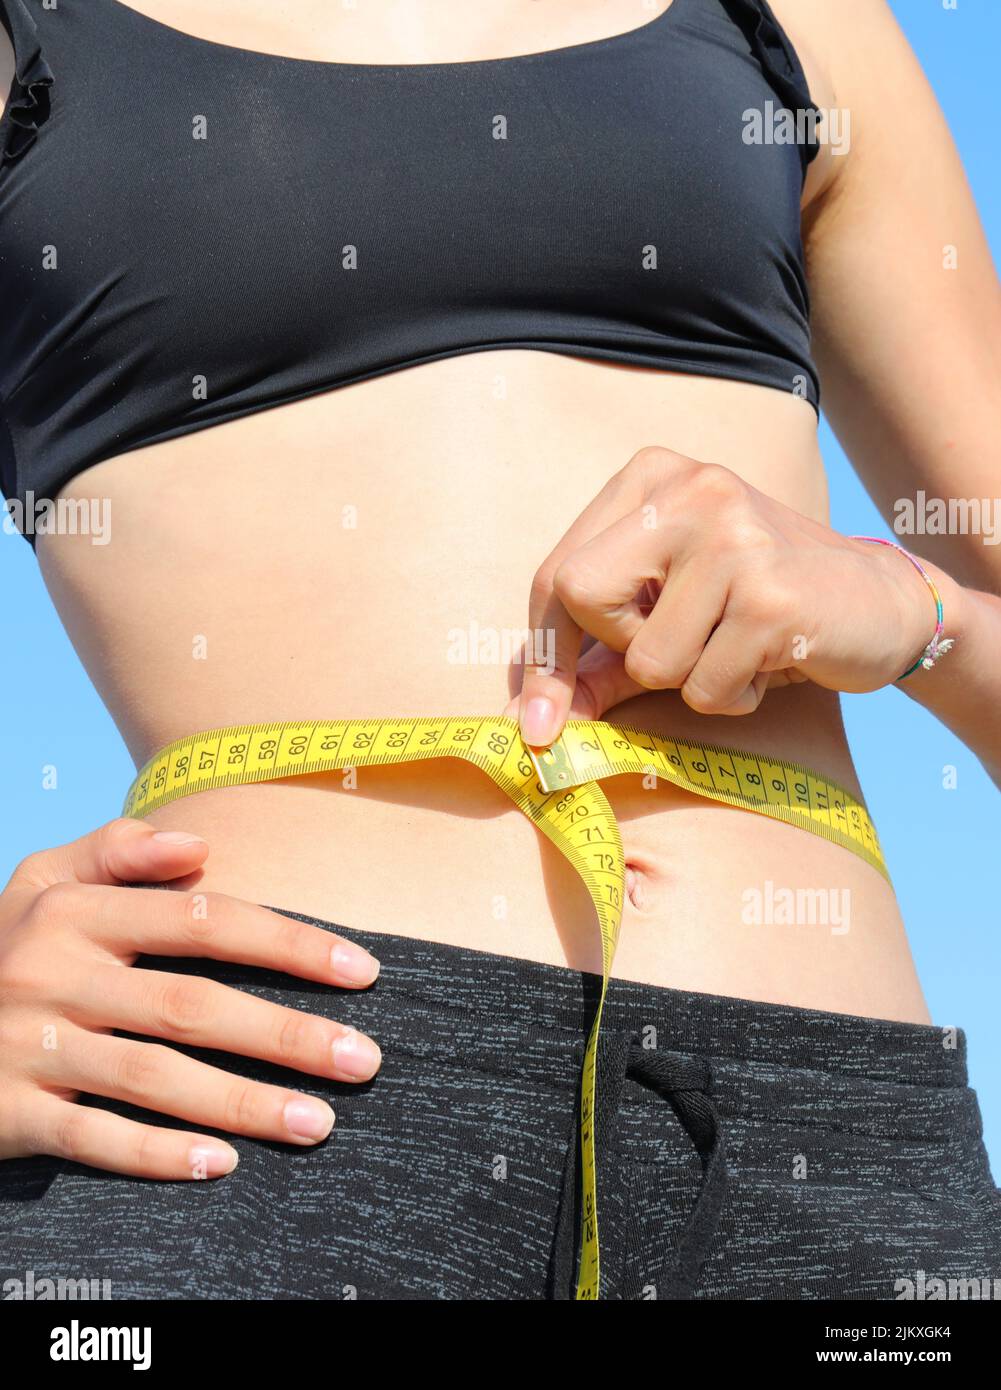 skinny girl measuring her waist using a yellow flexible tape measure with summer clothes Stock Photo